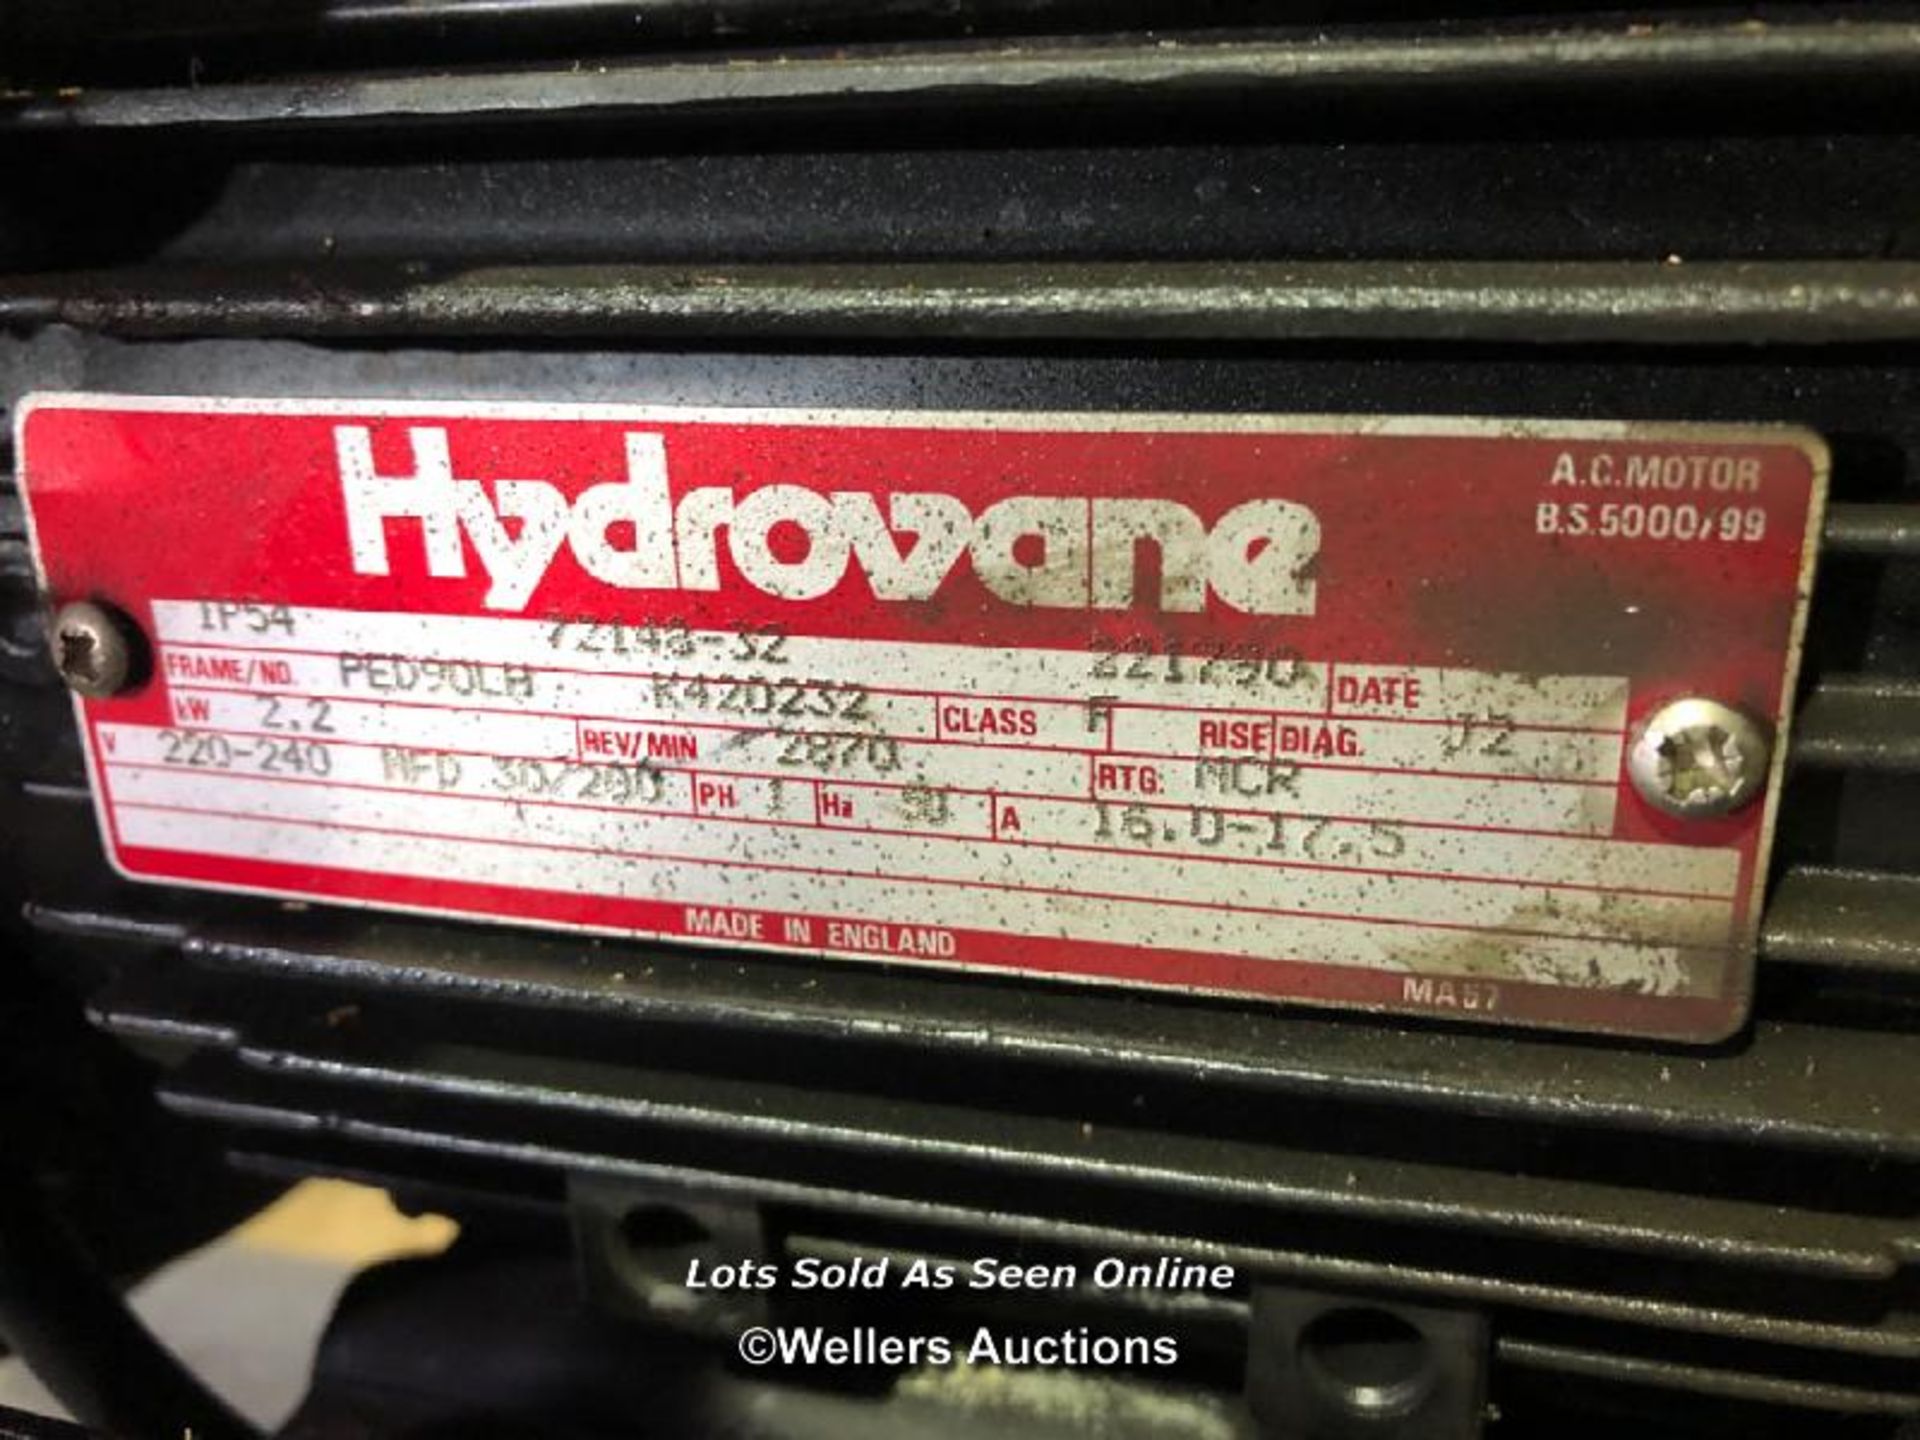 HYDROVANE 502 240V AIR COMPRESSOR, WITH 2 GAL. OF OIL, IN WORKING ORDER - Image 3 of 6